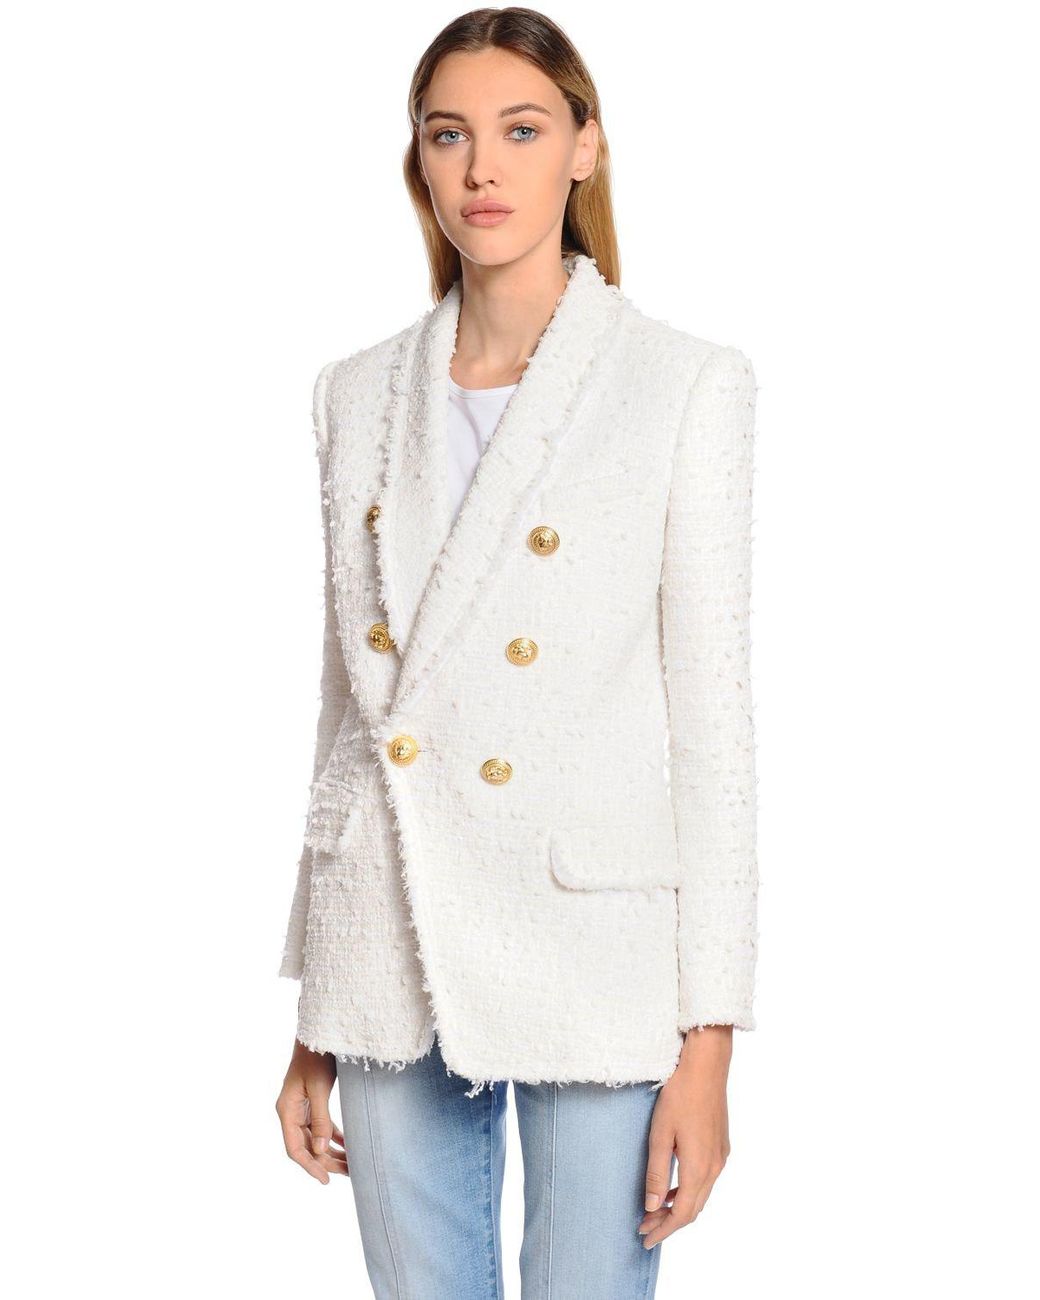 Balmain Double Breasted Fringed Tweed Blazer in White | Lyst